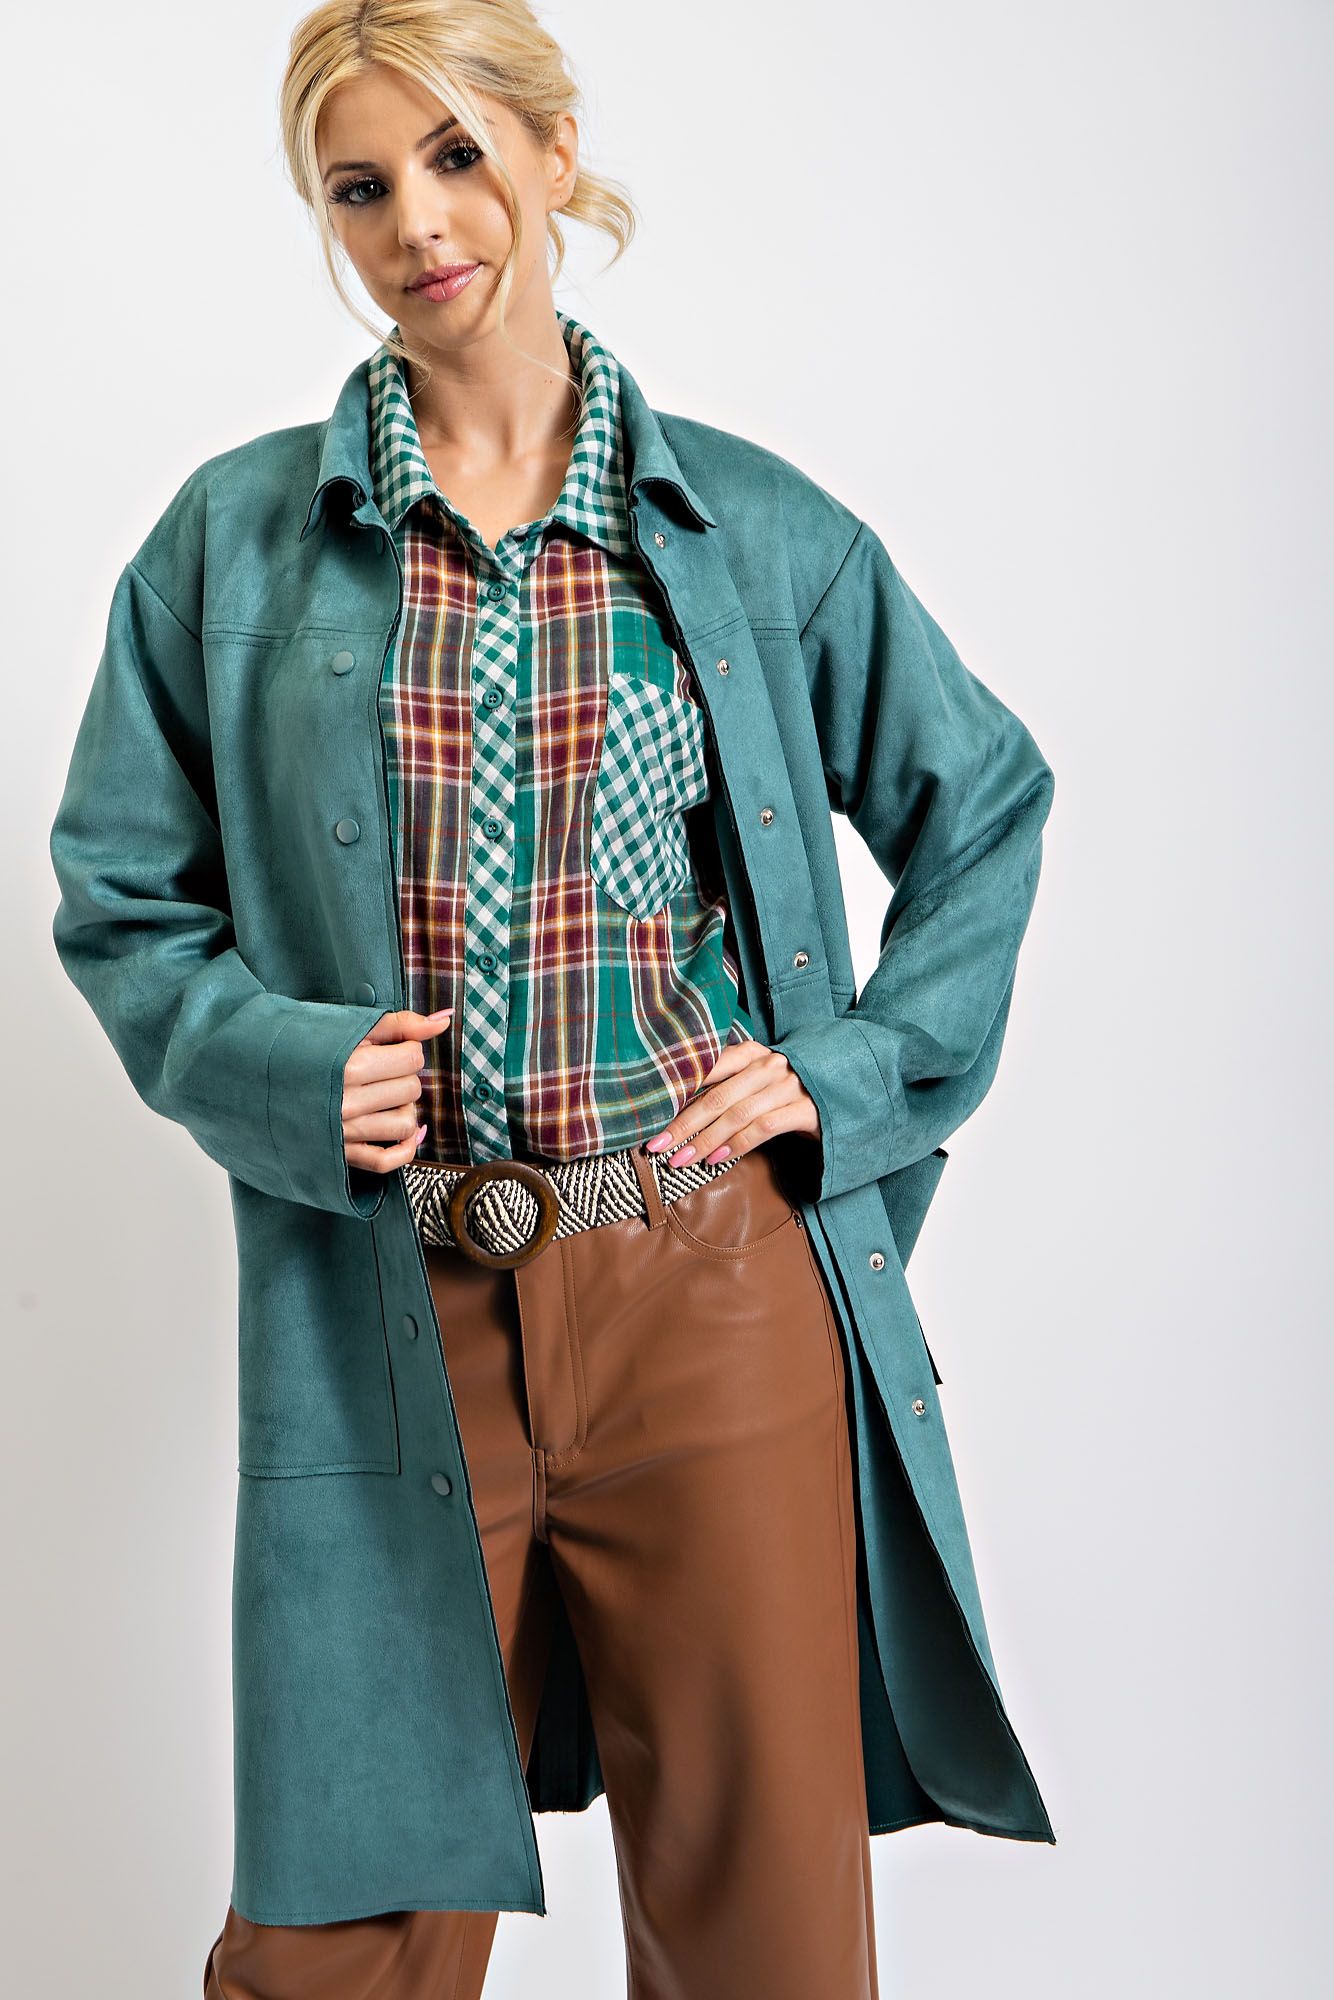 Teal Faux leather coat